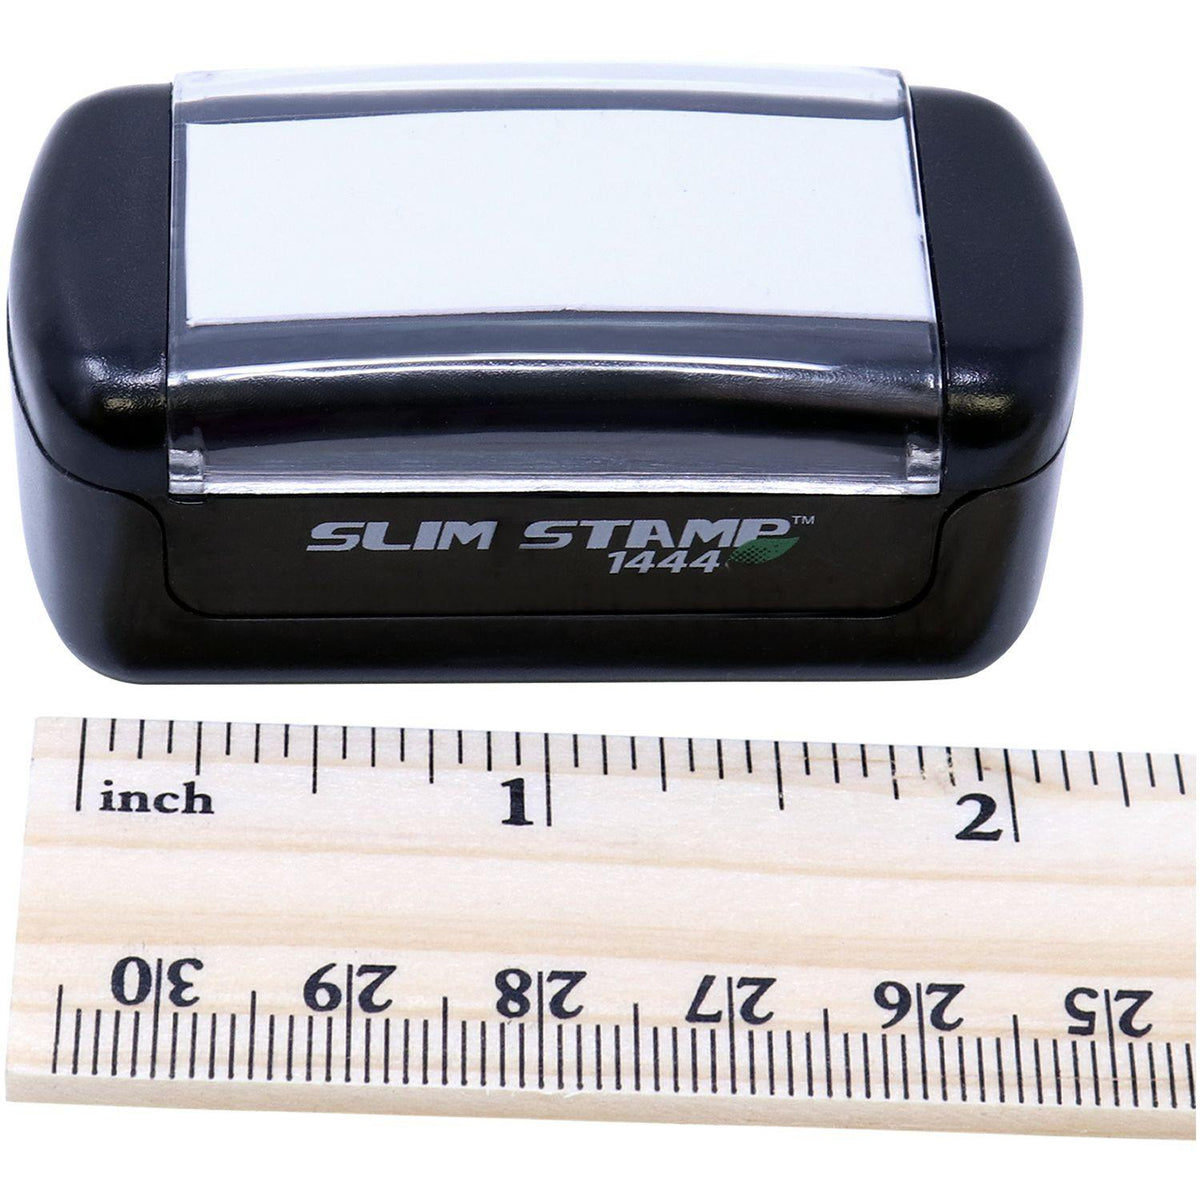 Measurement Slim Pre-Inked Please Pay Now No Statements will be Sent Stamp with Ruler